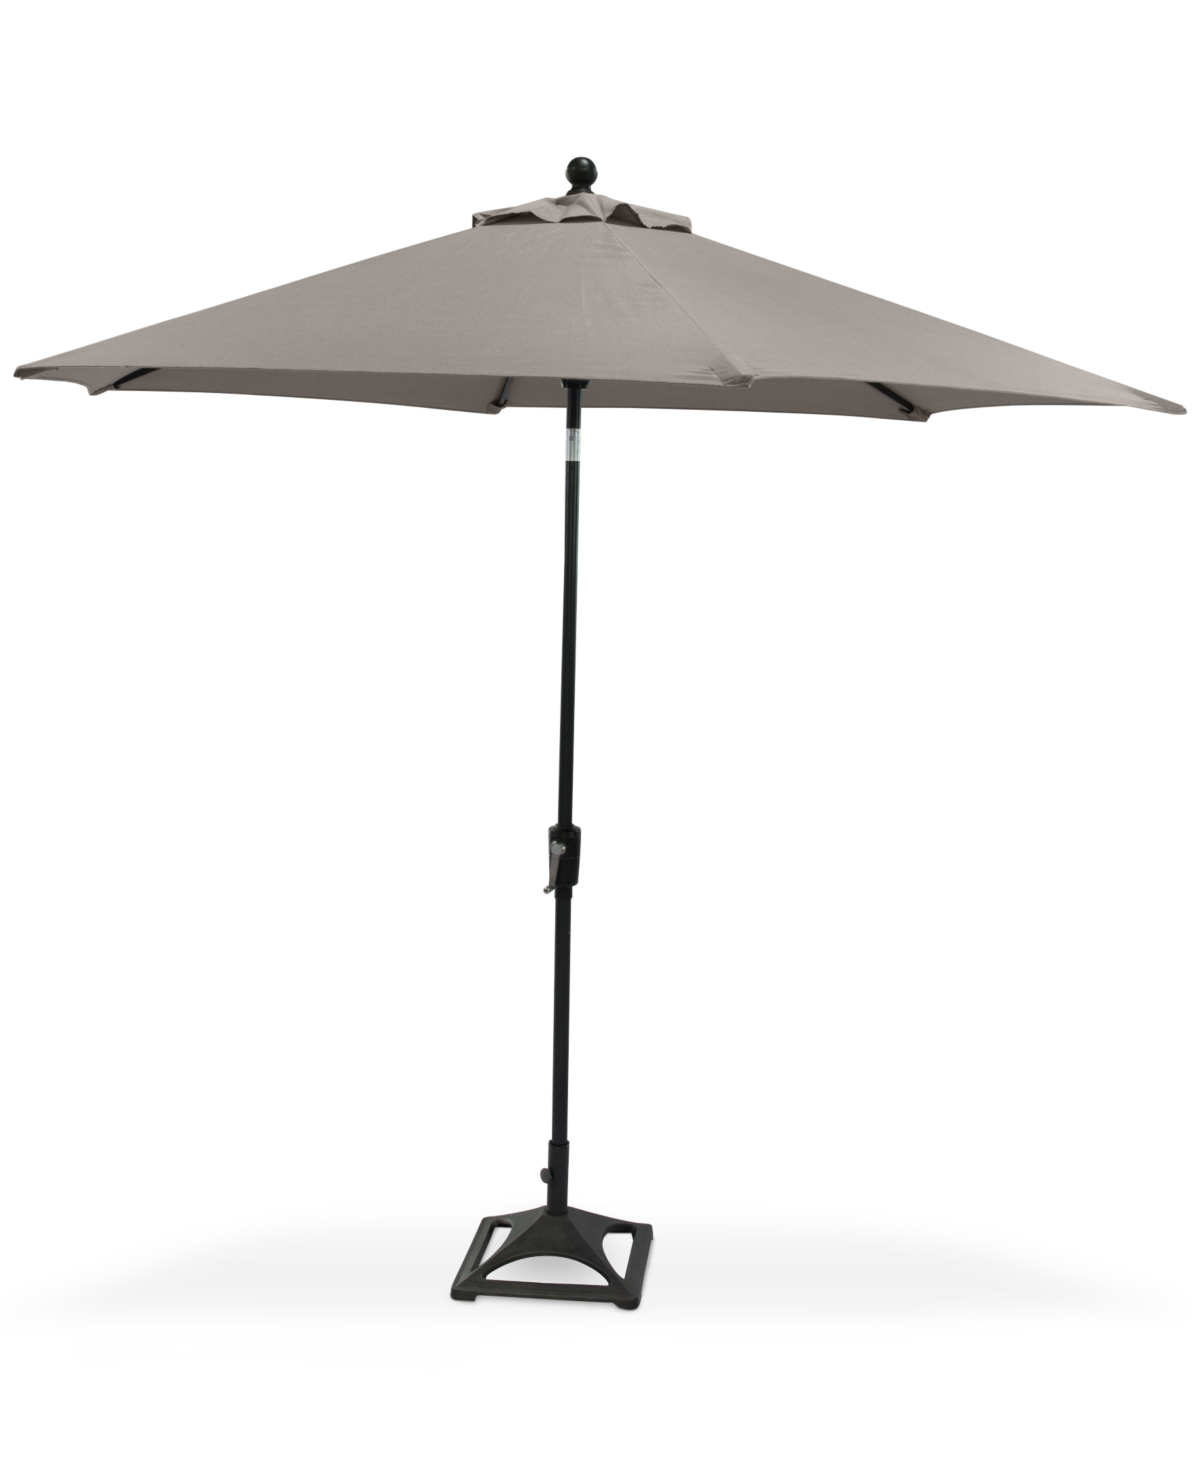 Agio Closeout! Marlough Ii Outdoor 9' Umbrella With Base, Created For Macy's In Outdura Storm Smoke